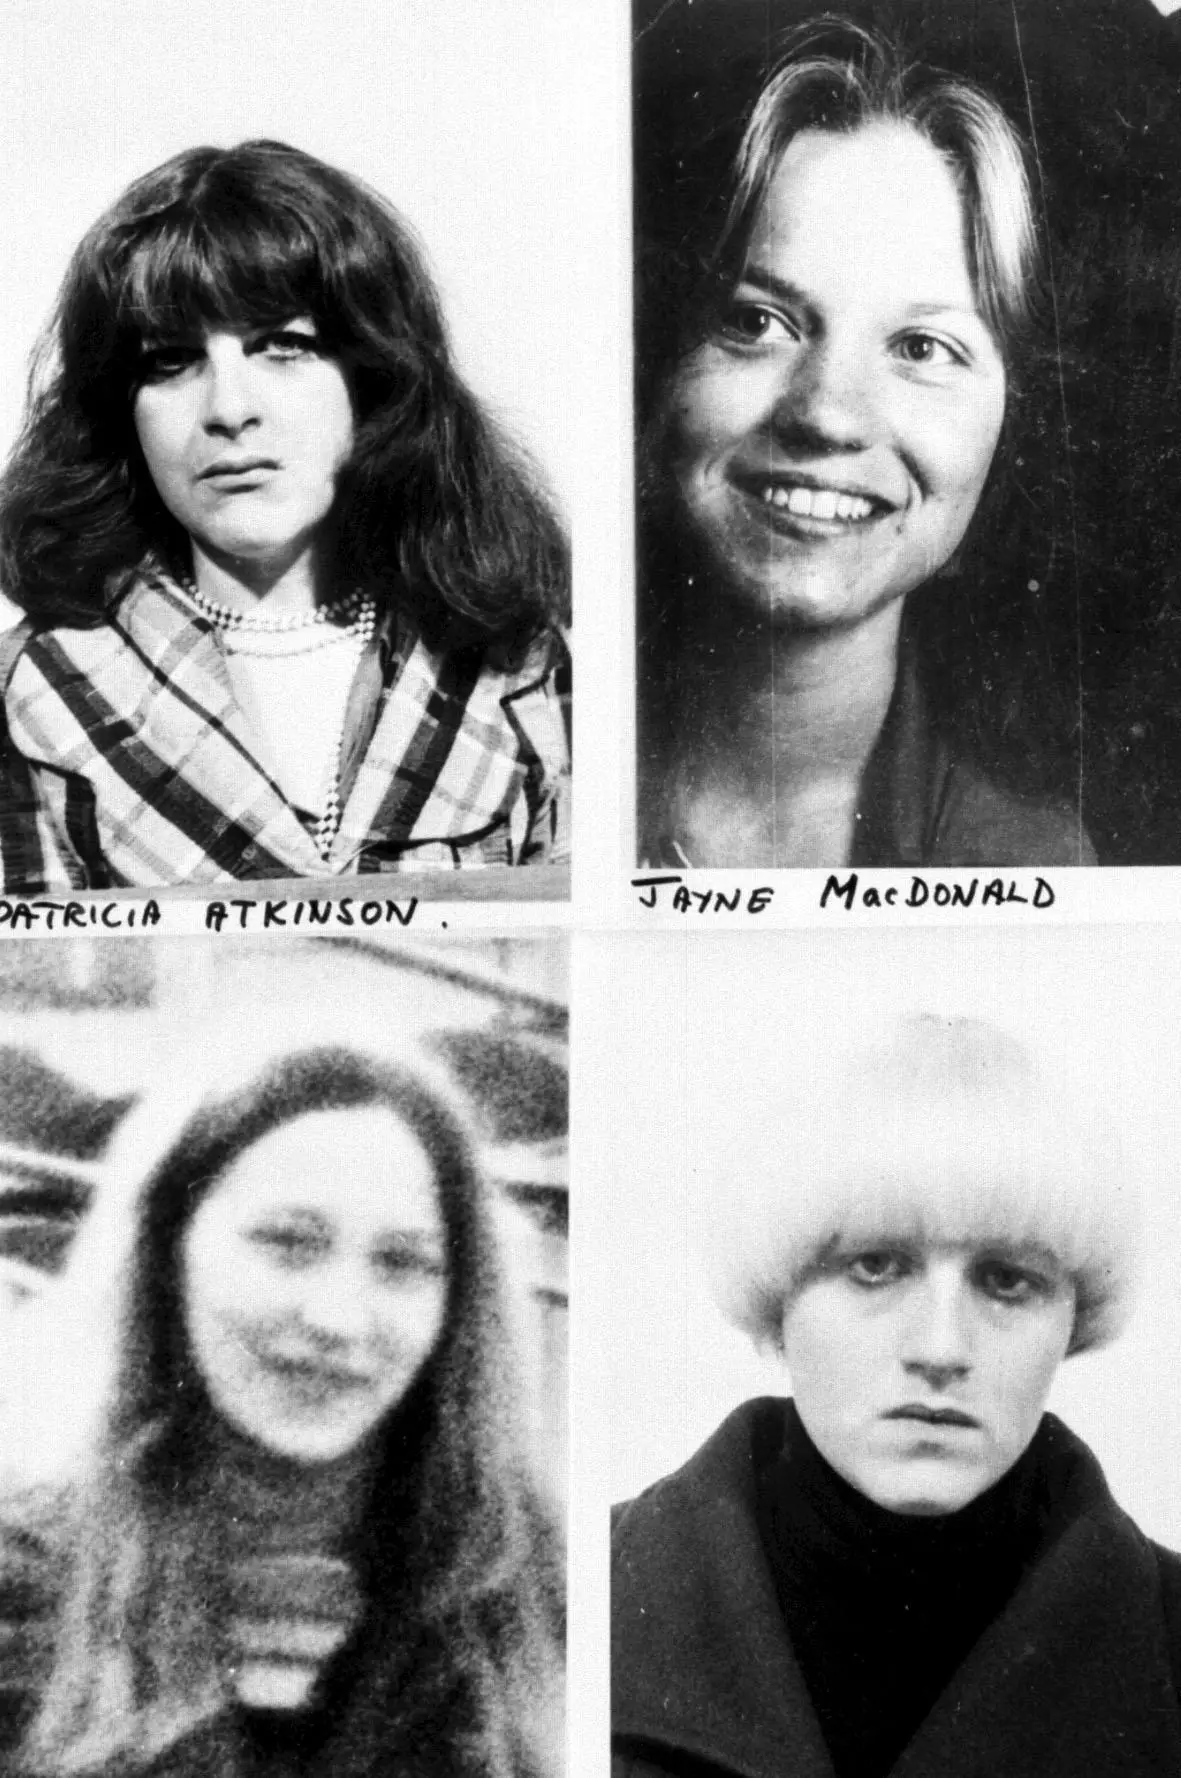 Four of Peter Sutcliffe's victims. Top left - Patricia Atkinson, top right - Jayne Macdonald, bottom left - Jean Jordan and bottom right - Yvonne Pearson.